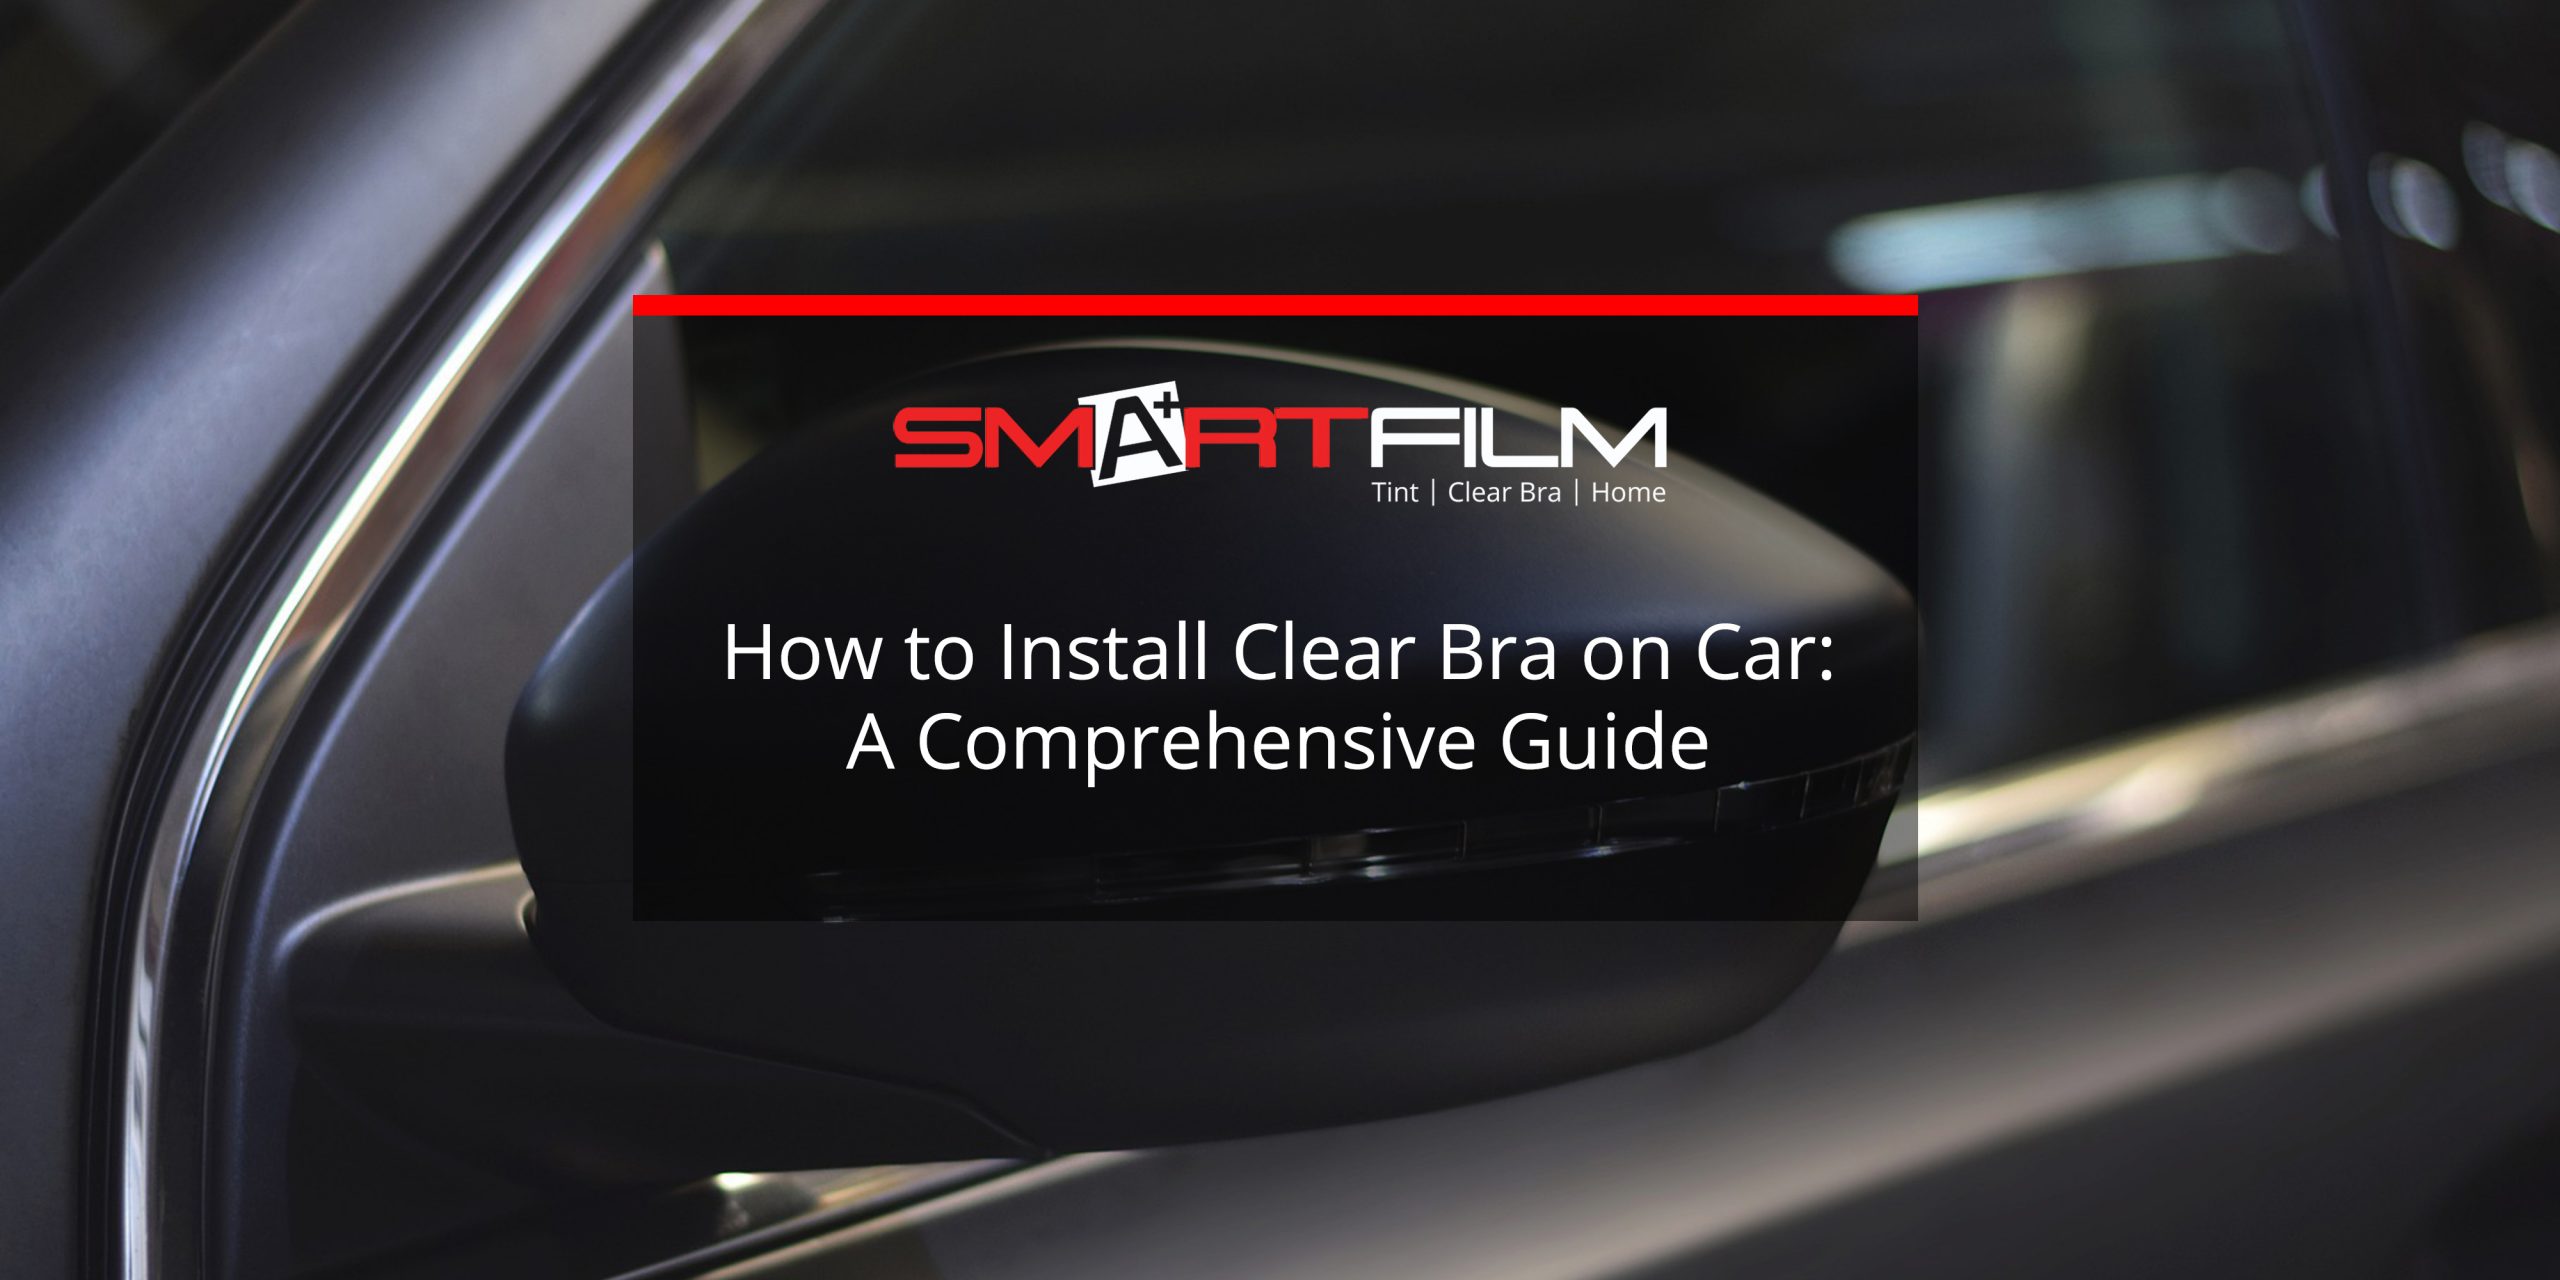 https://smartfilmaz.com/wp-content/uploads/How-to-Install-Clear-Bra-on-Car-A-Comprehensive-Guide-scaled.jpg